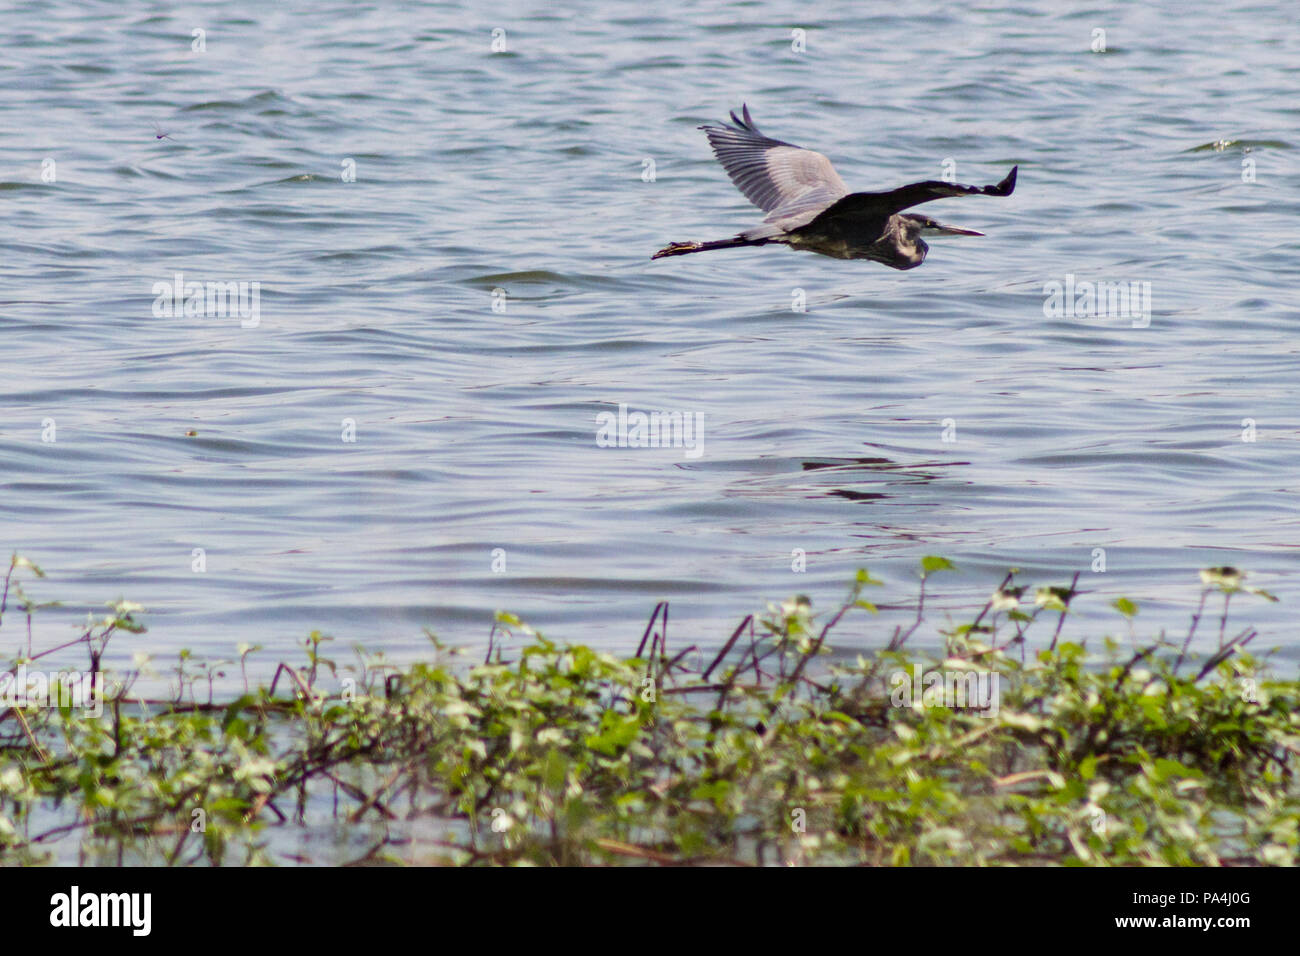 A Great Blue Heron soaring gracefully over a body of water heading out of sight Stock Photo